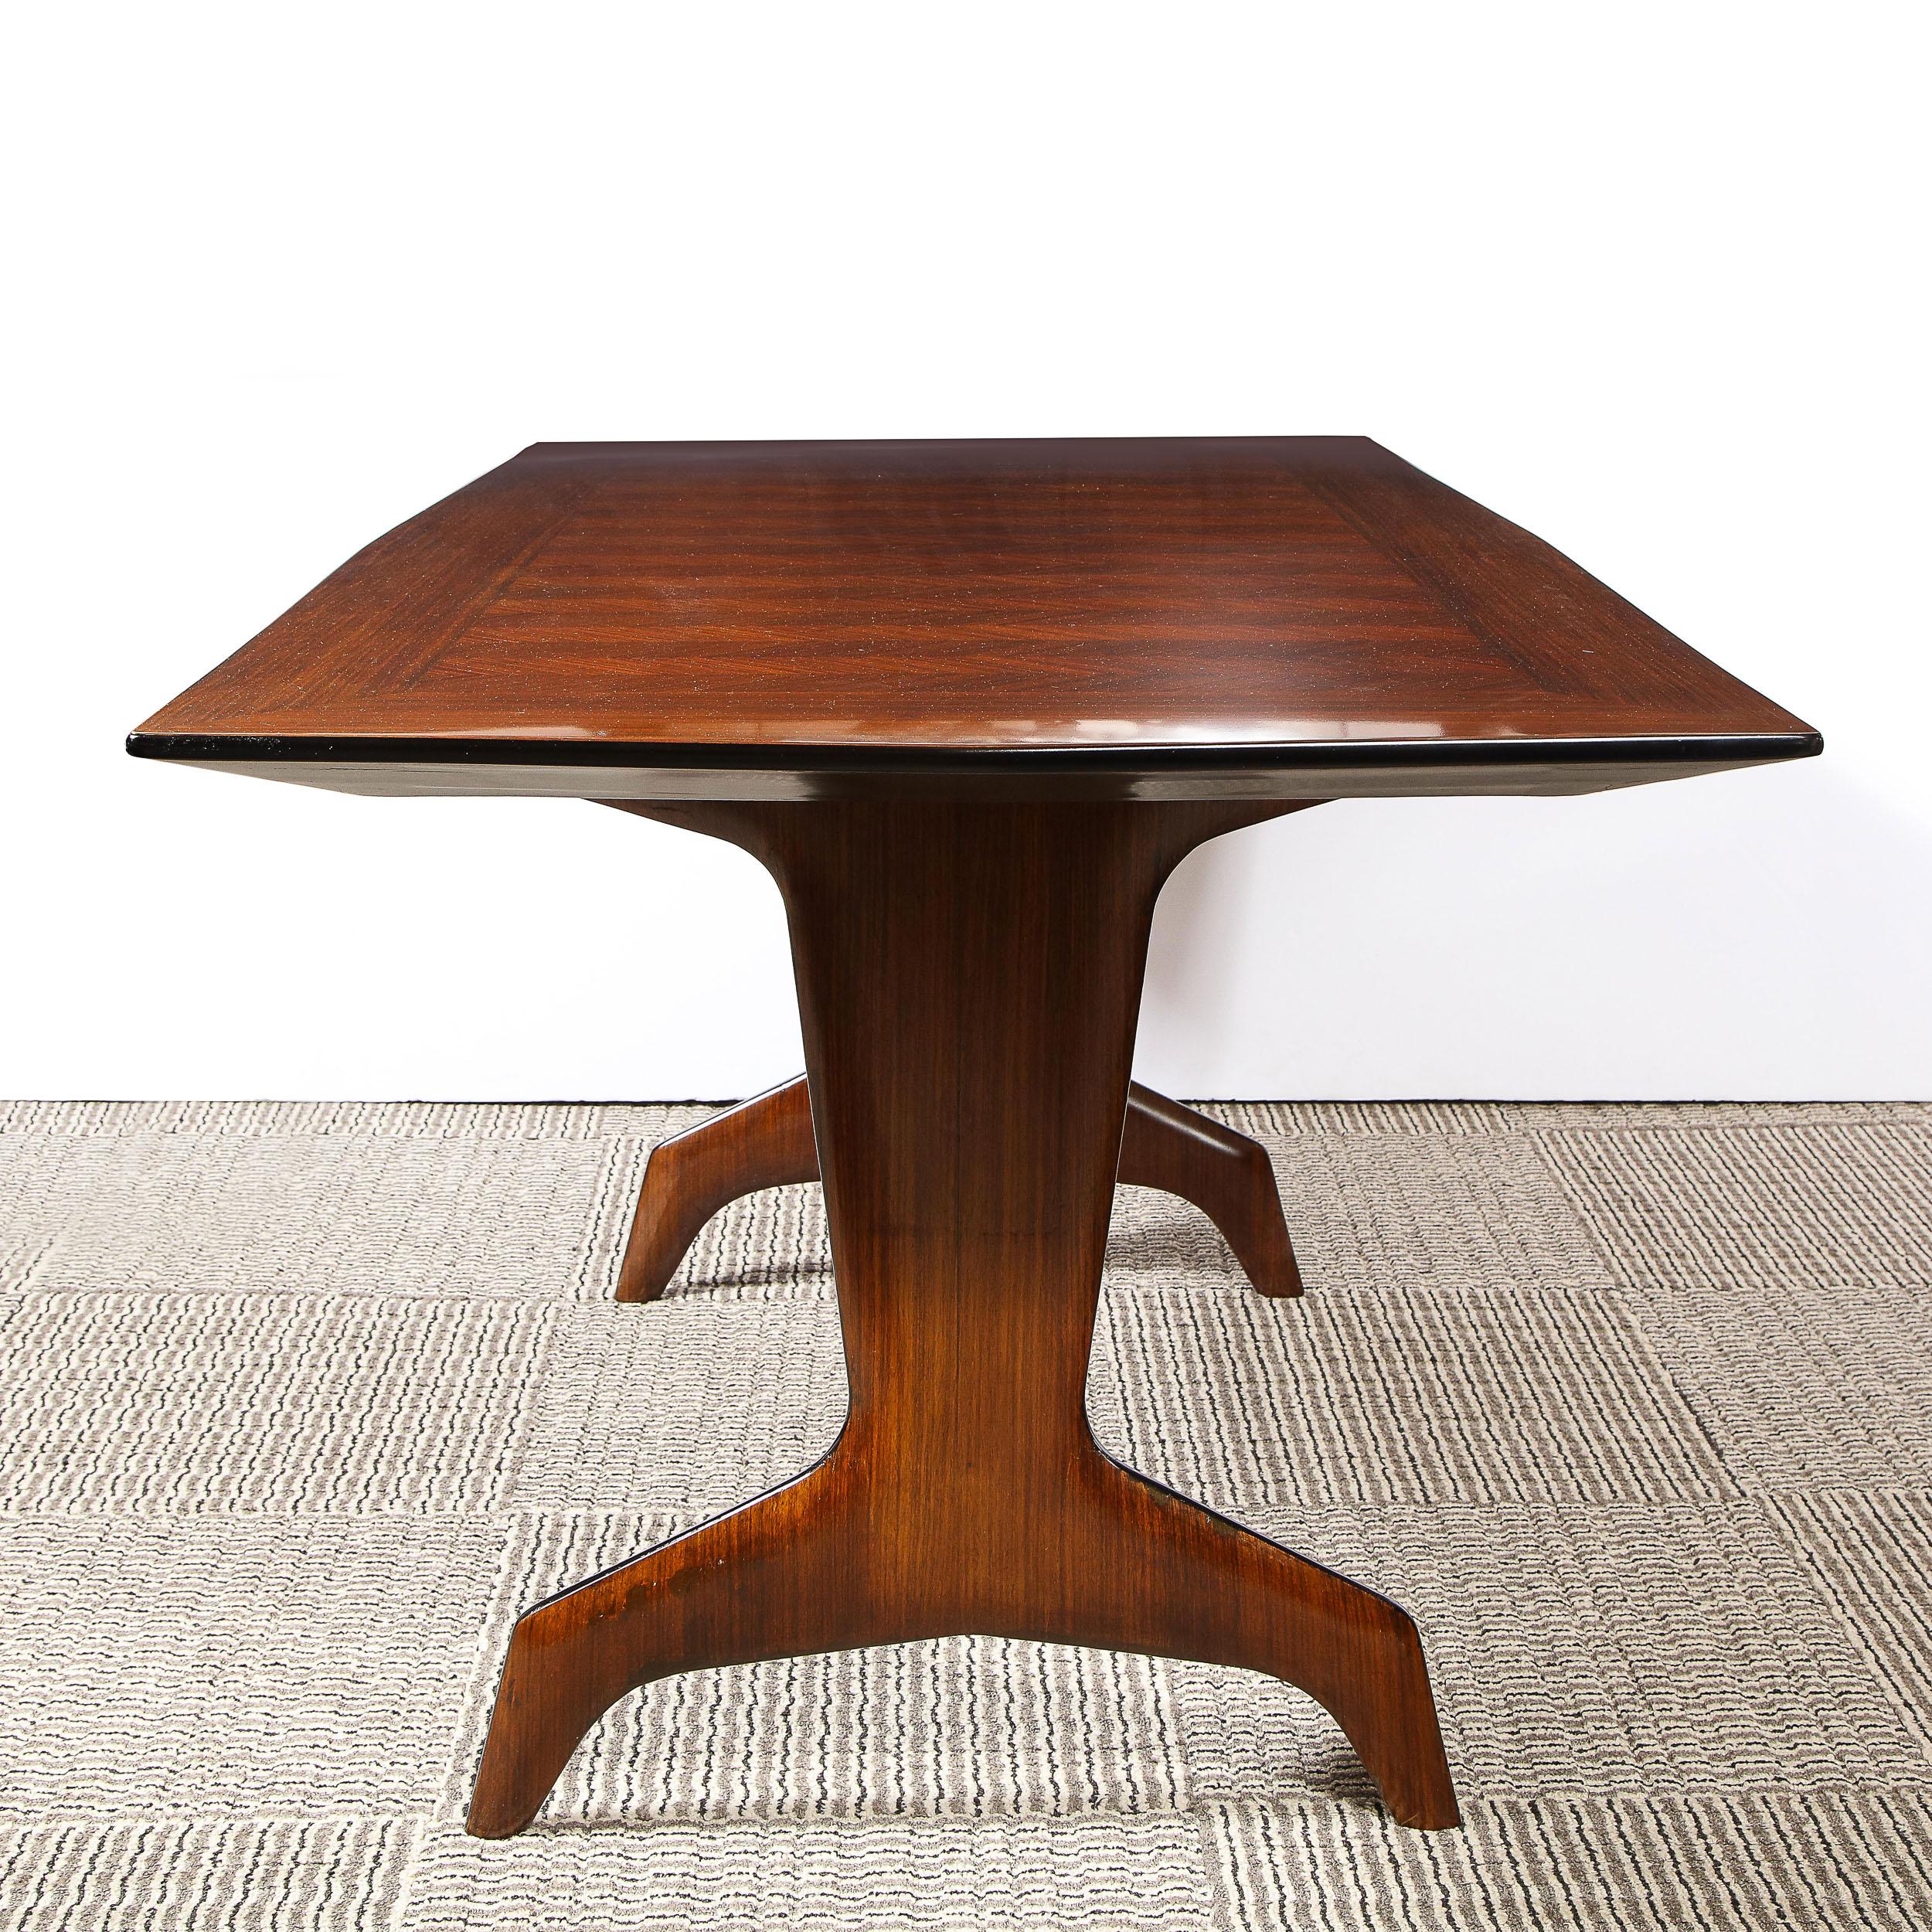 Italian Mid Century Modern Inlaid & Bookmatched Zebrawood Dining Table by Carlo De Carli For Sale